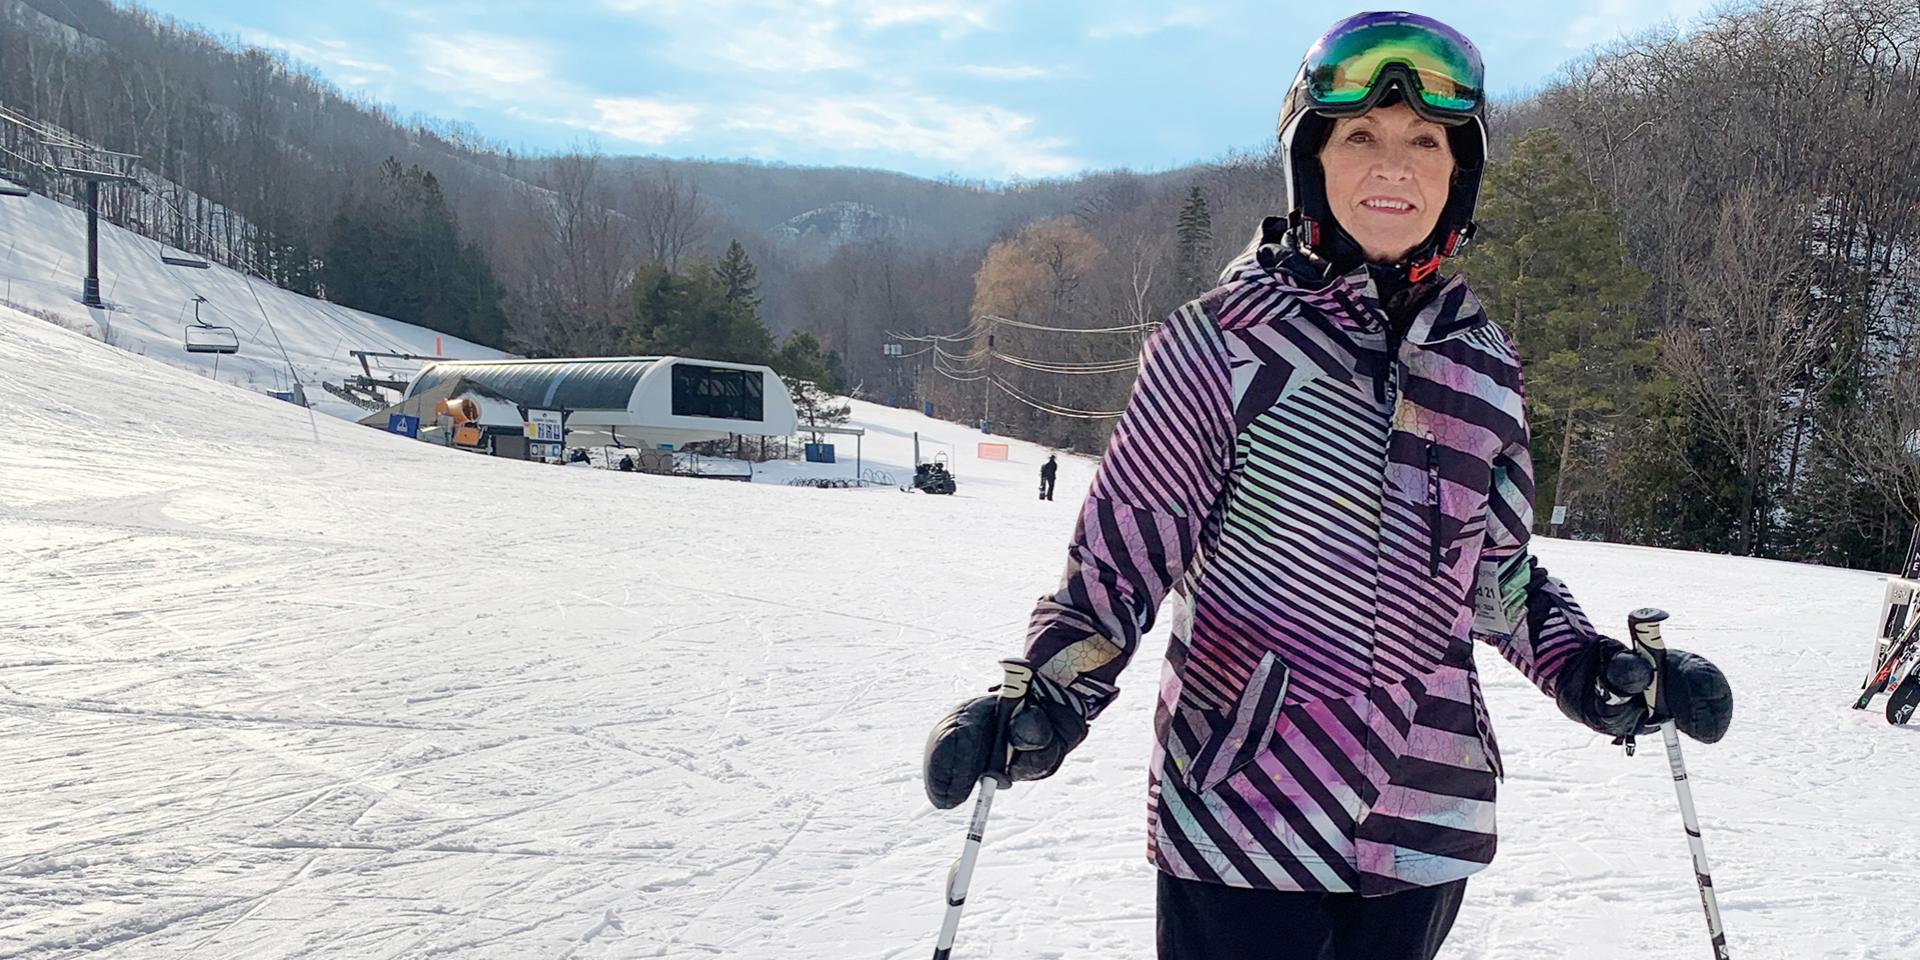 Margrie, an older white woman, on a ski hill with poles and googles.